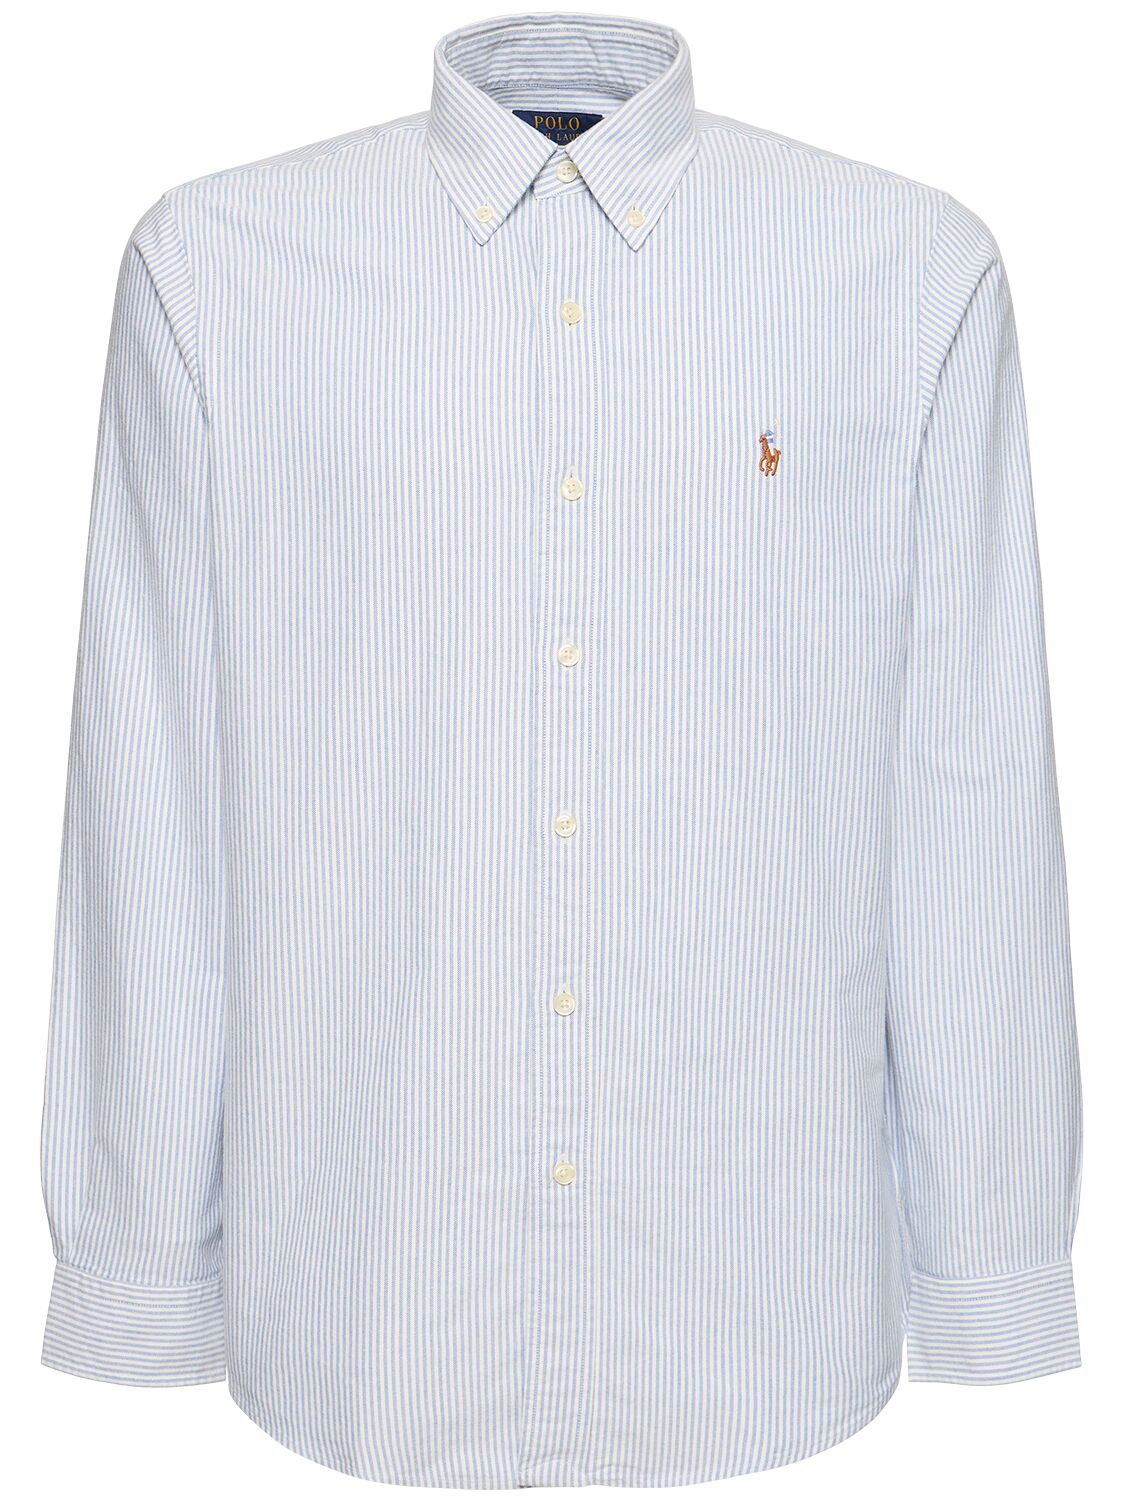 Image of Cotton Classic Oxford Shirt